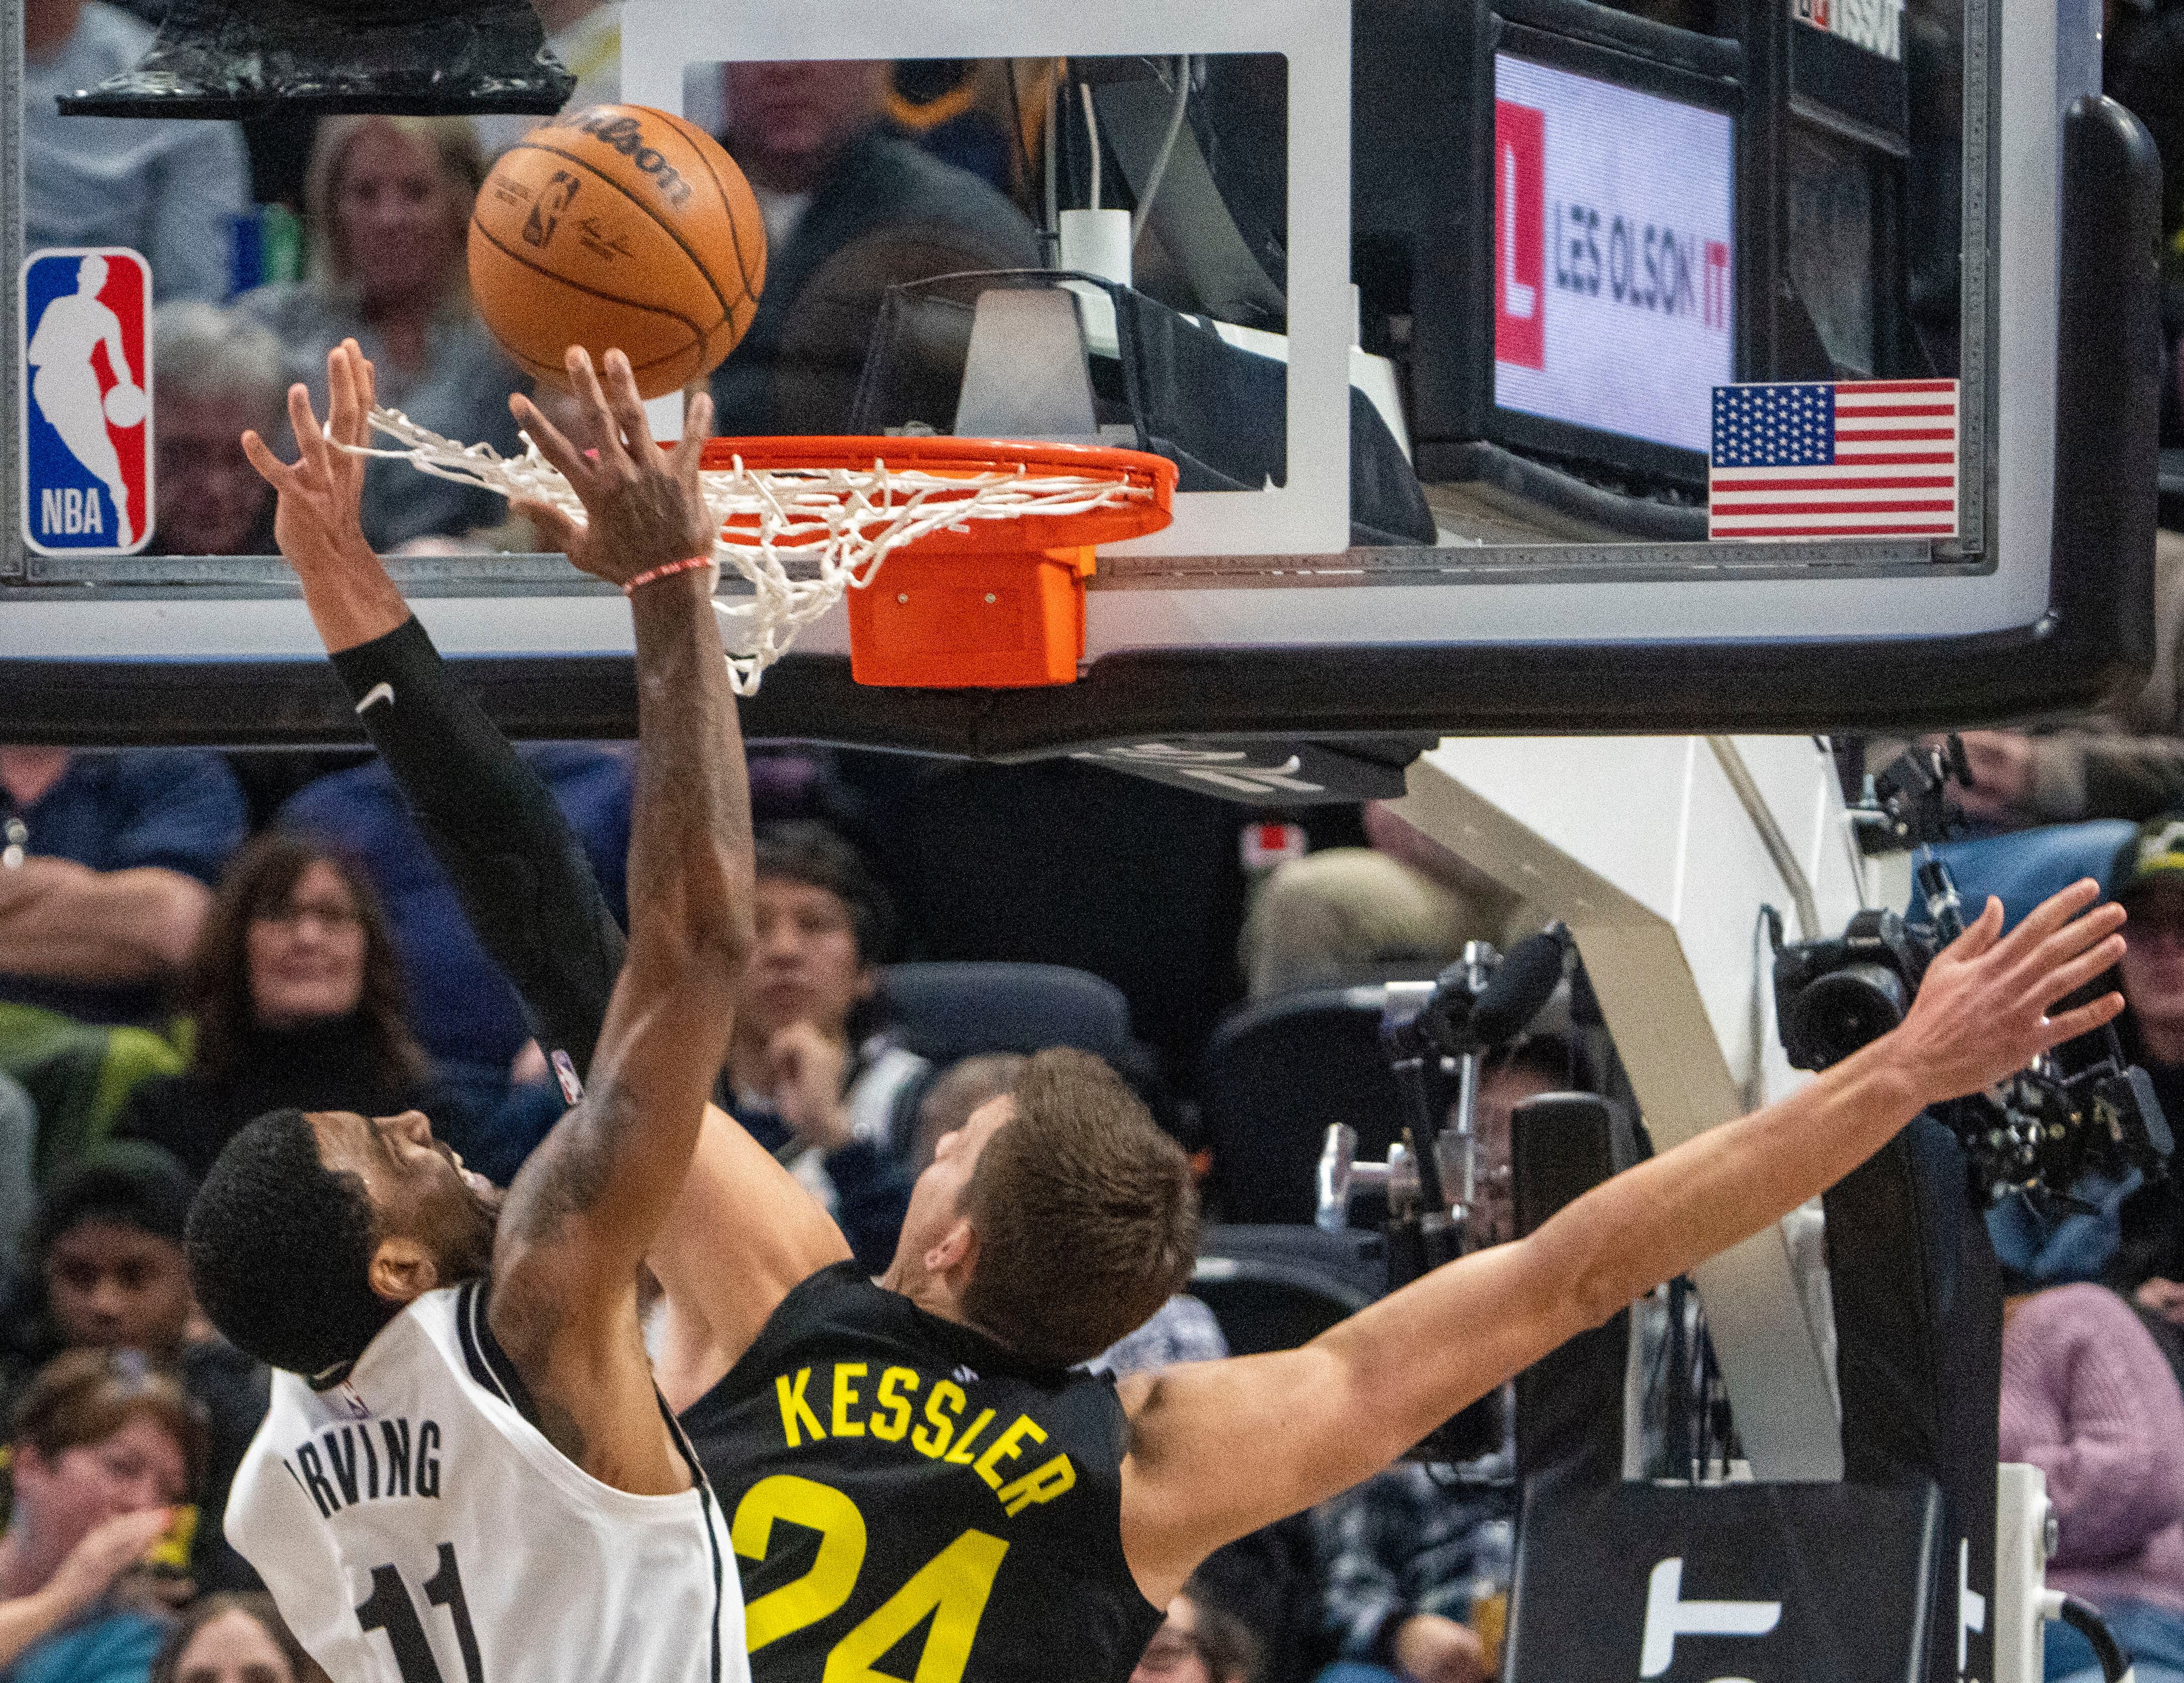 Mike Conley With 18 Points In Win Over Brooklyn Nets